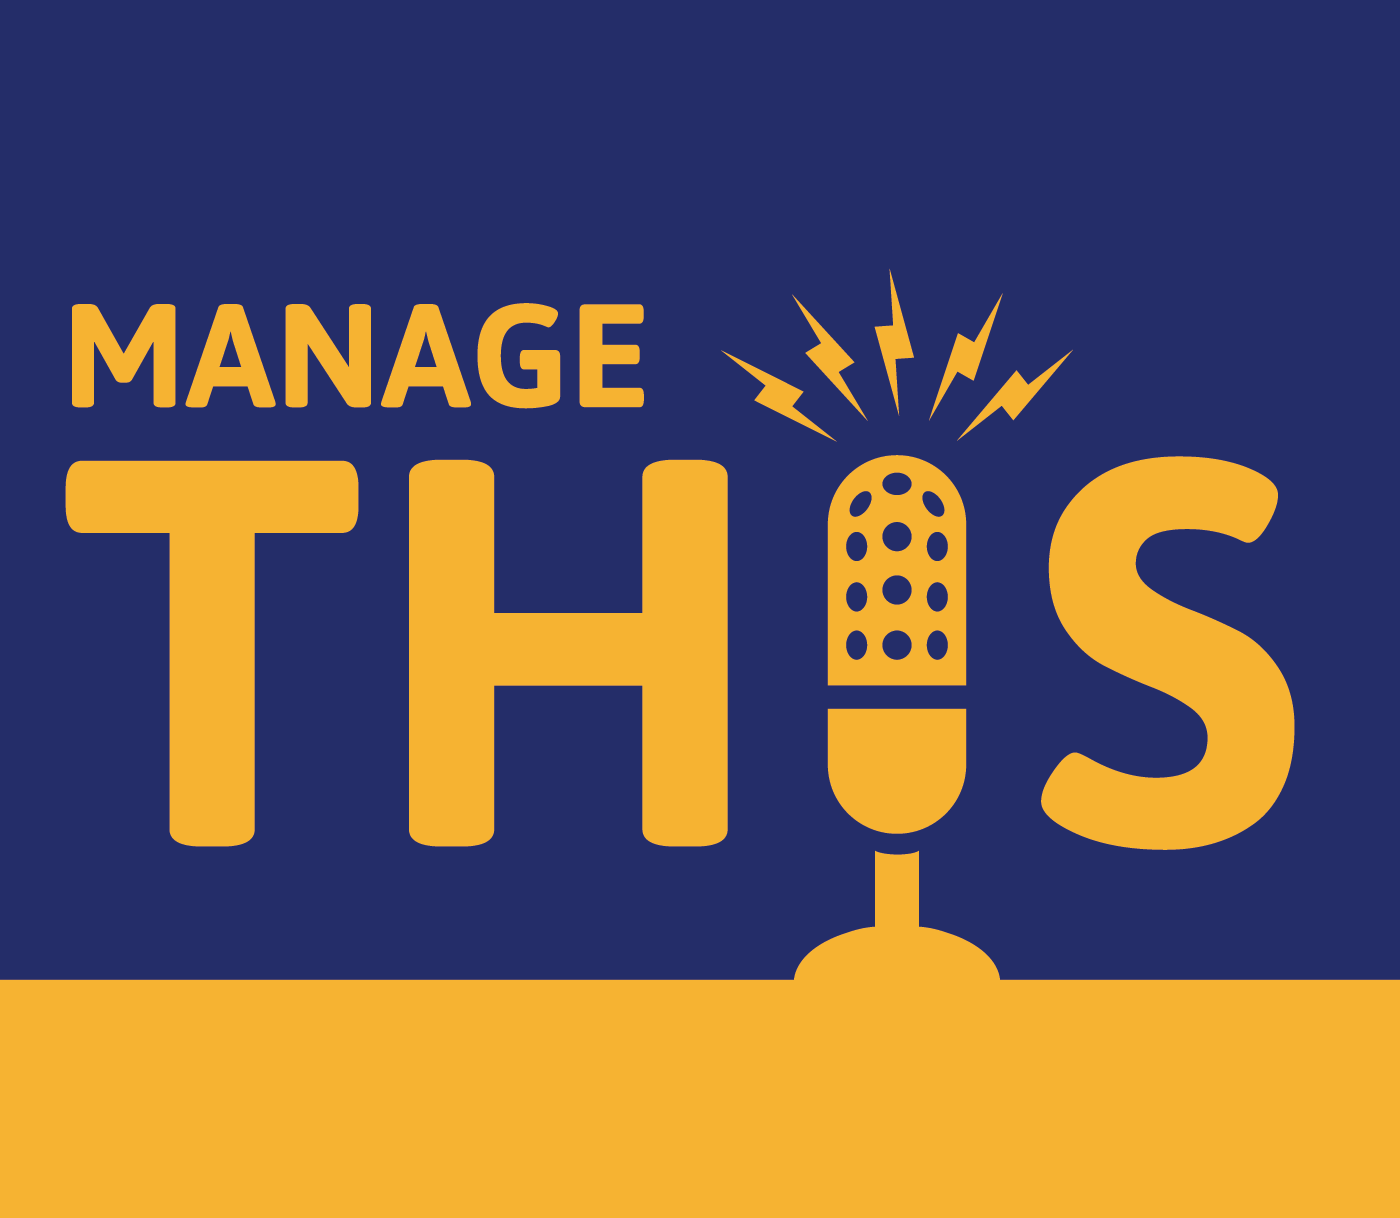 Episode 1: PMP Exam Changes Effective January 11th, 2016